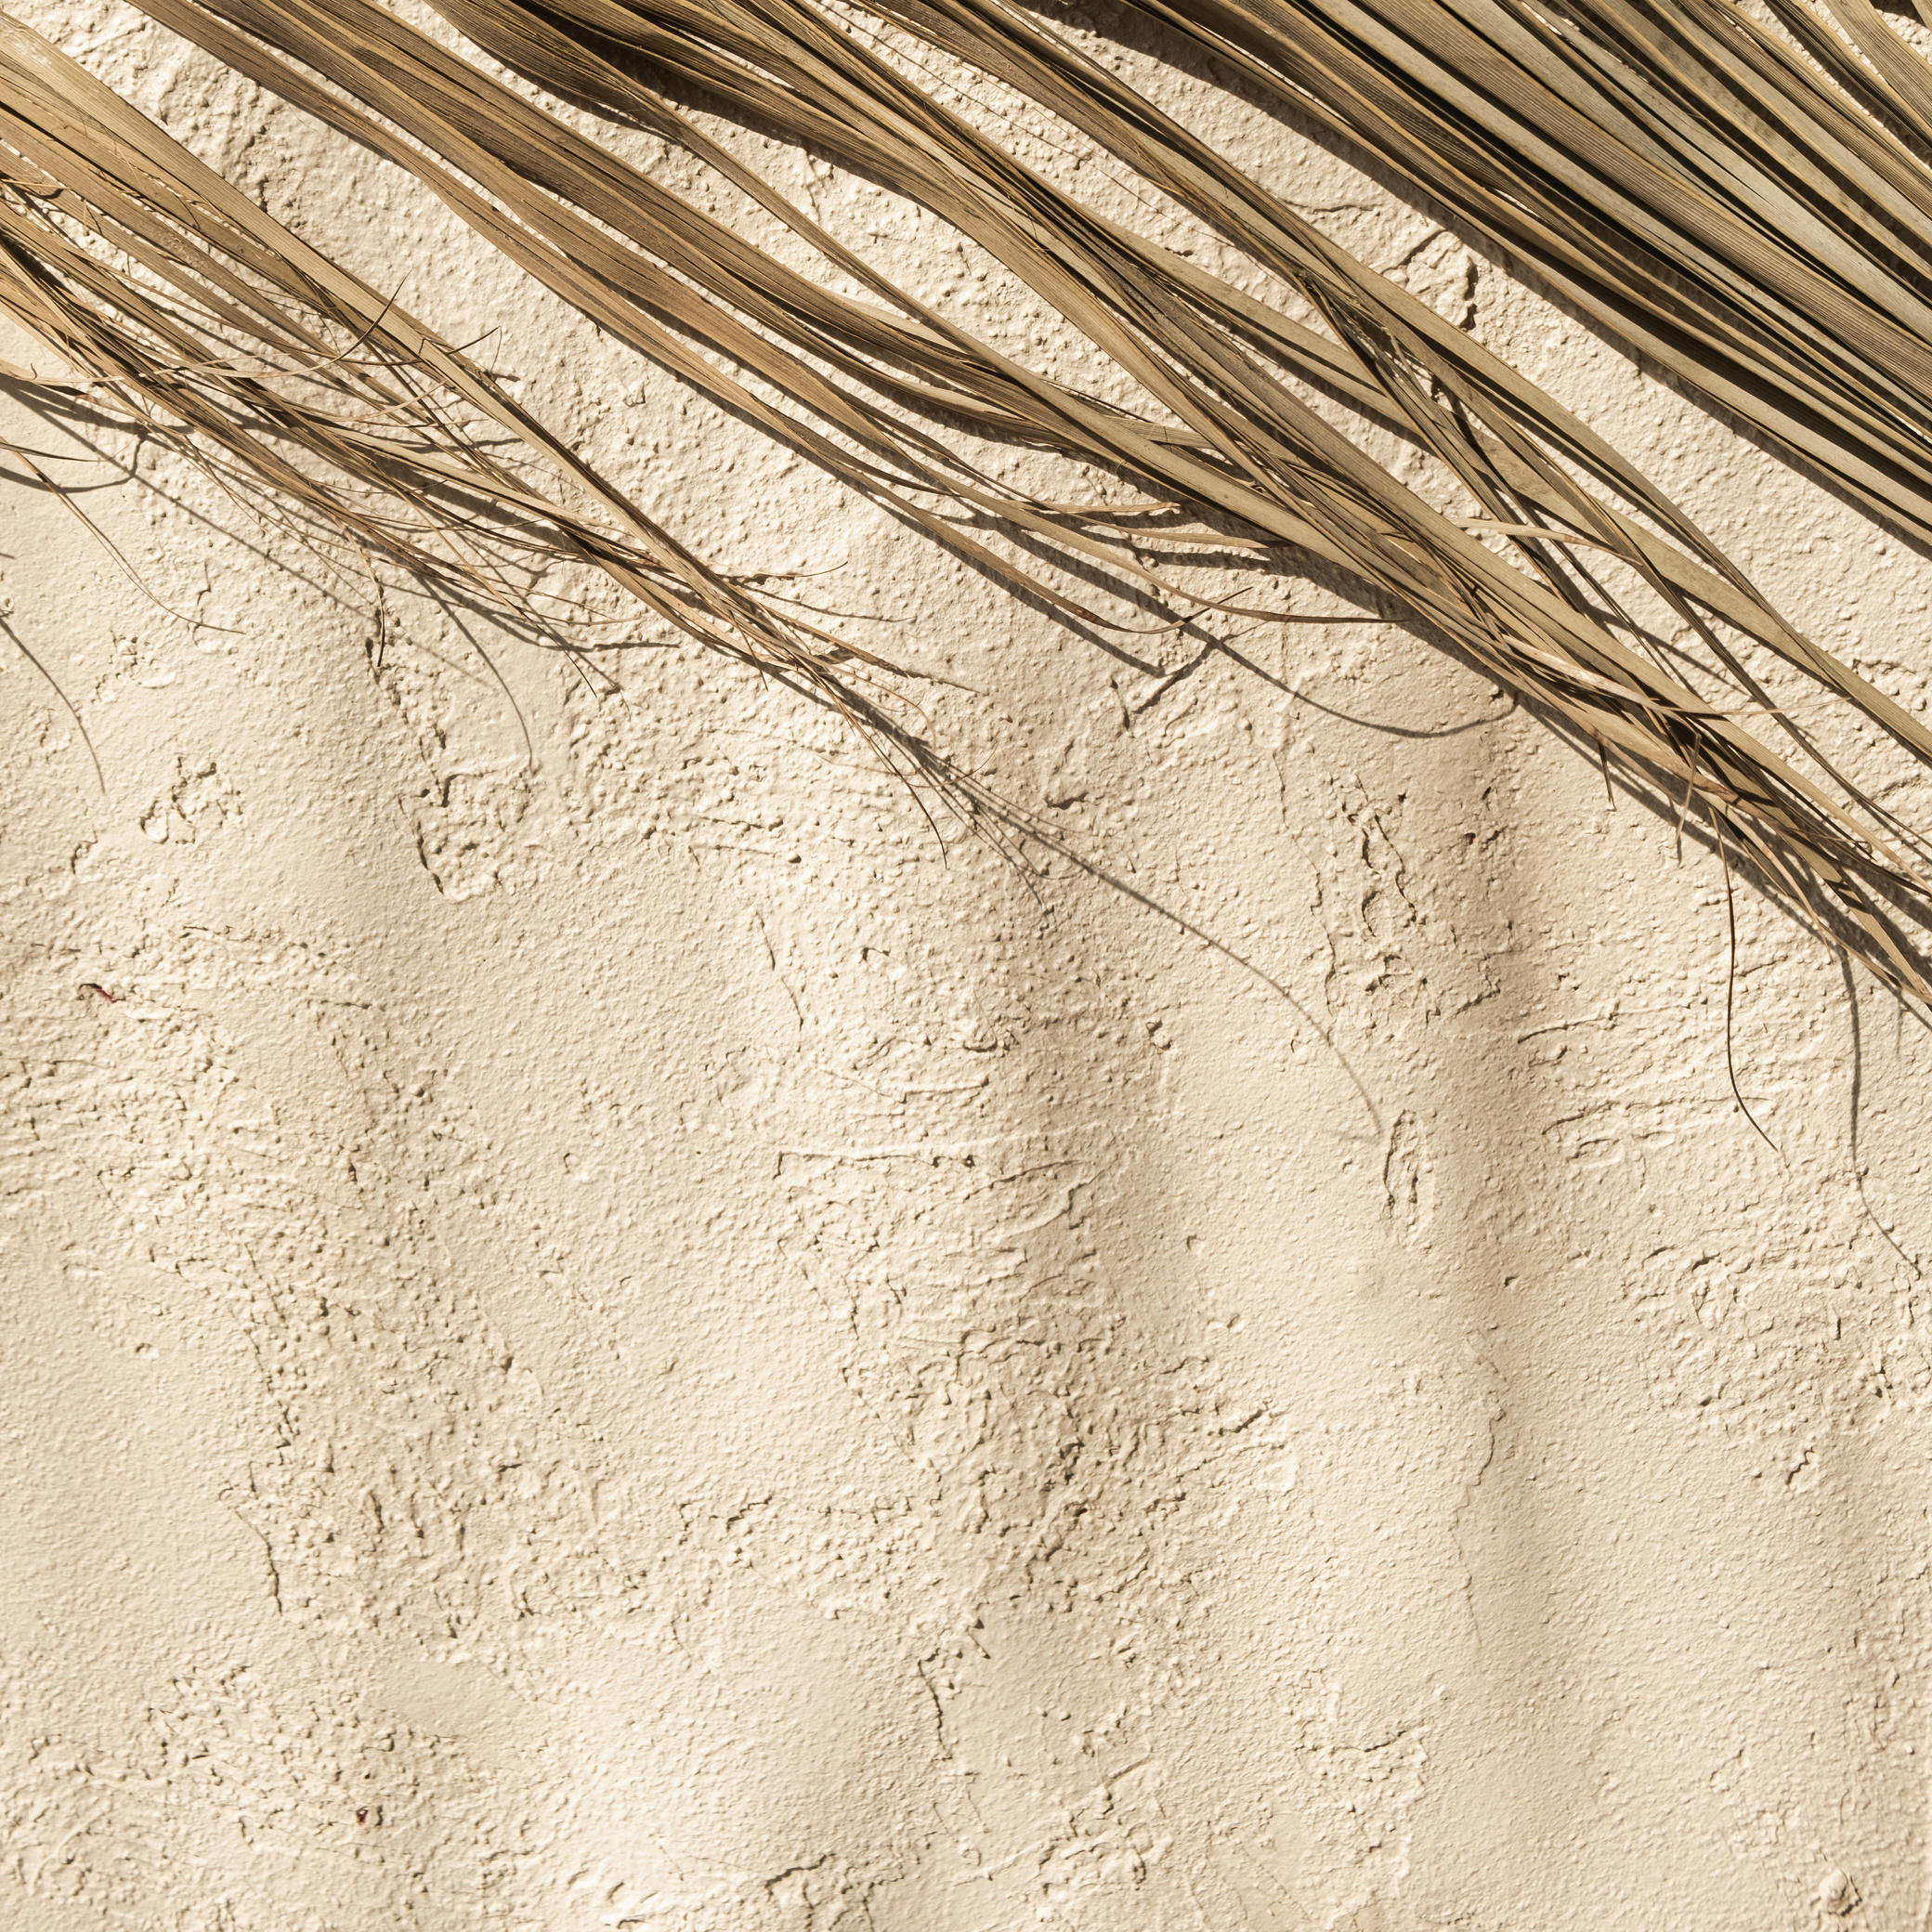 Dry Palm Branch on Concrete Wall Background